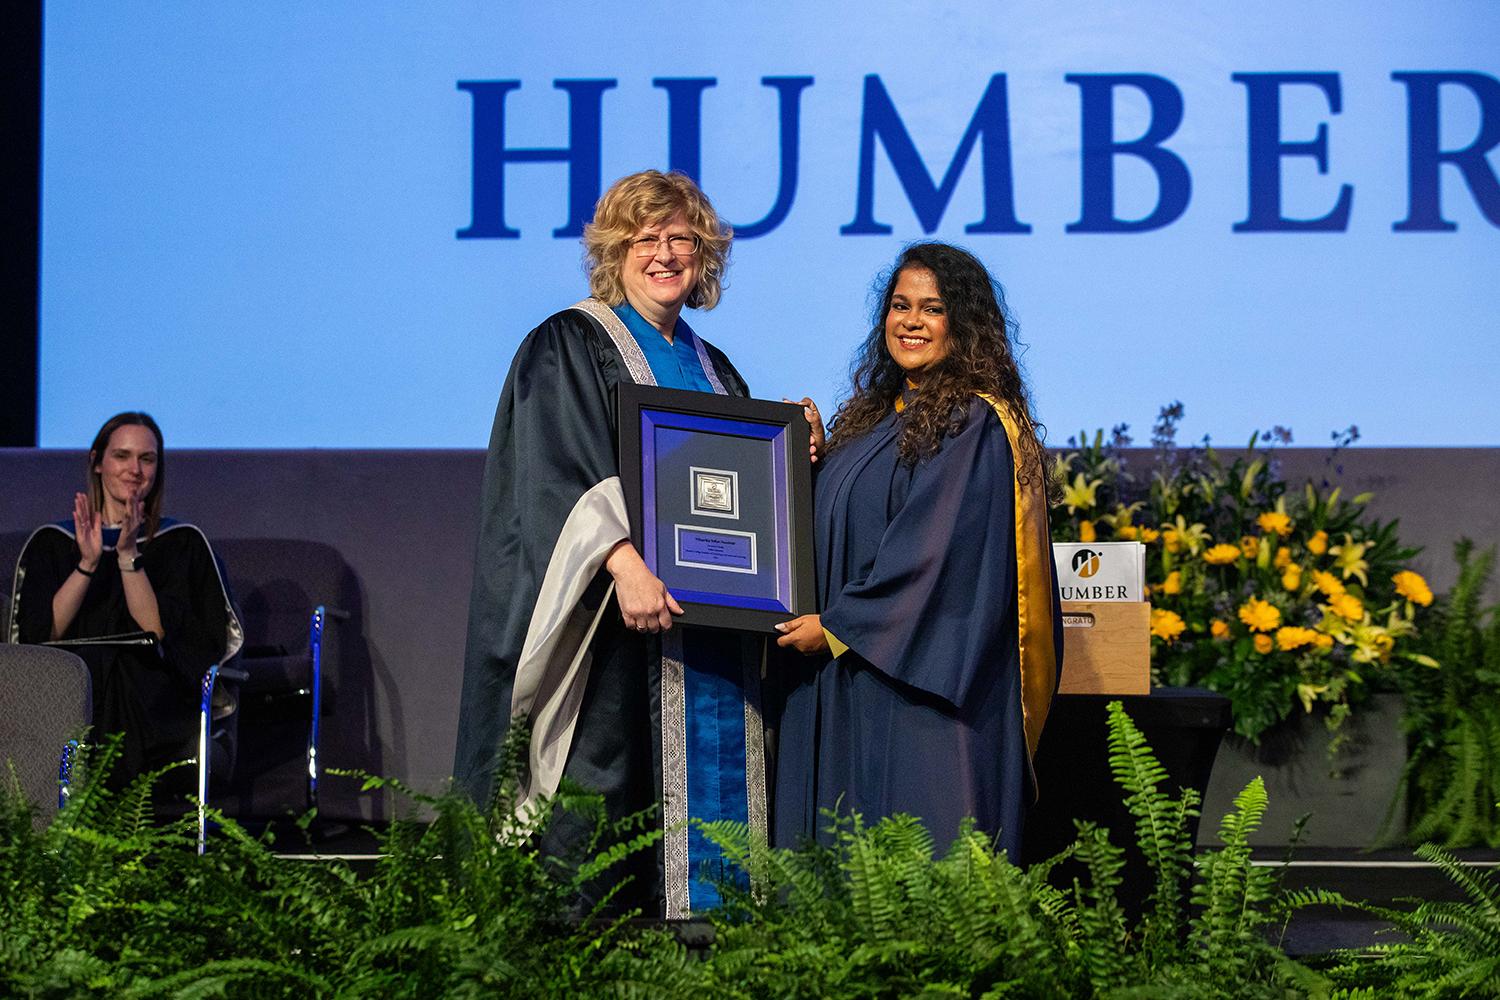 A person presents a student wearing a graduation gown with a framed credential. A screen reading Humber is in the background.